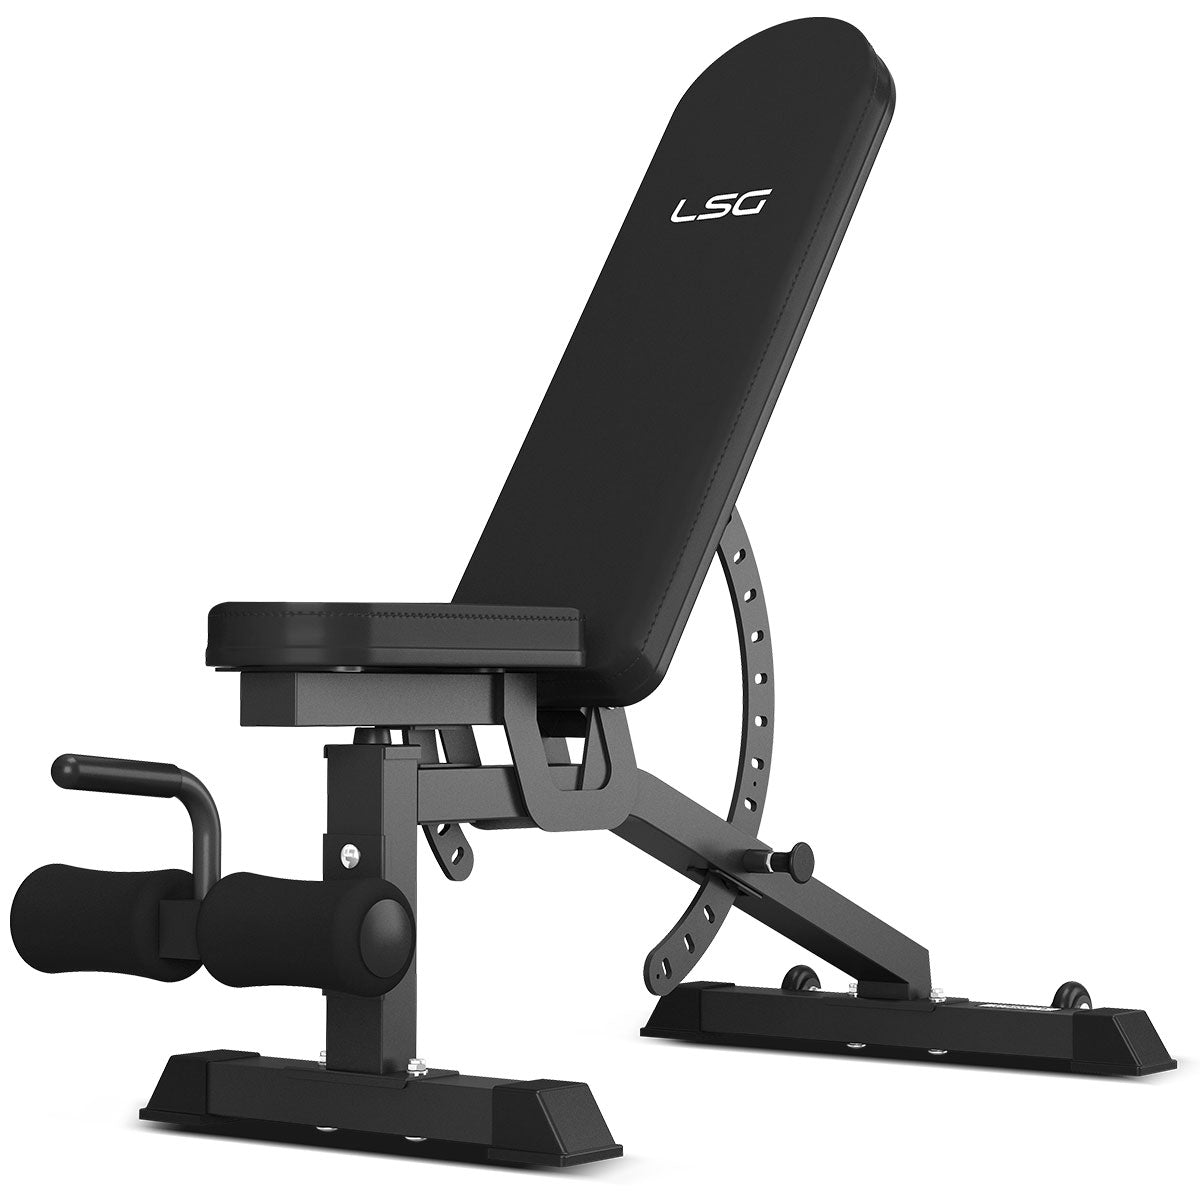 Abs Tower 20 in1 gym bench with 50kg steel gym equipments for home